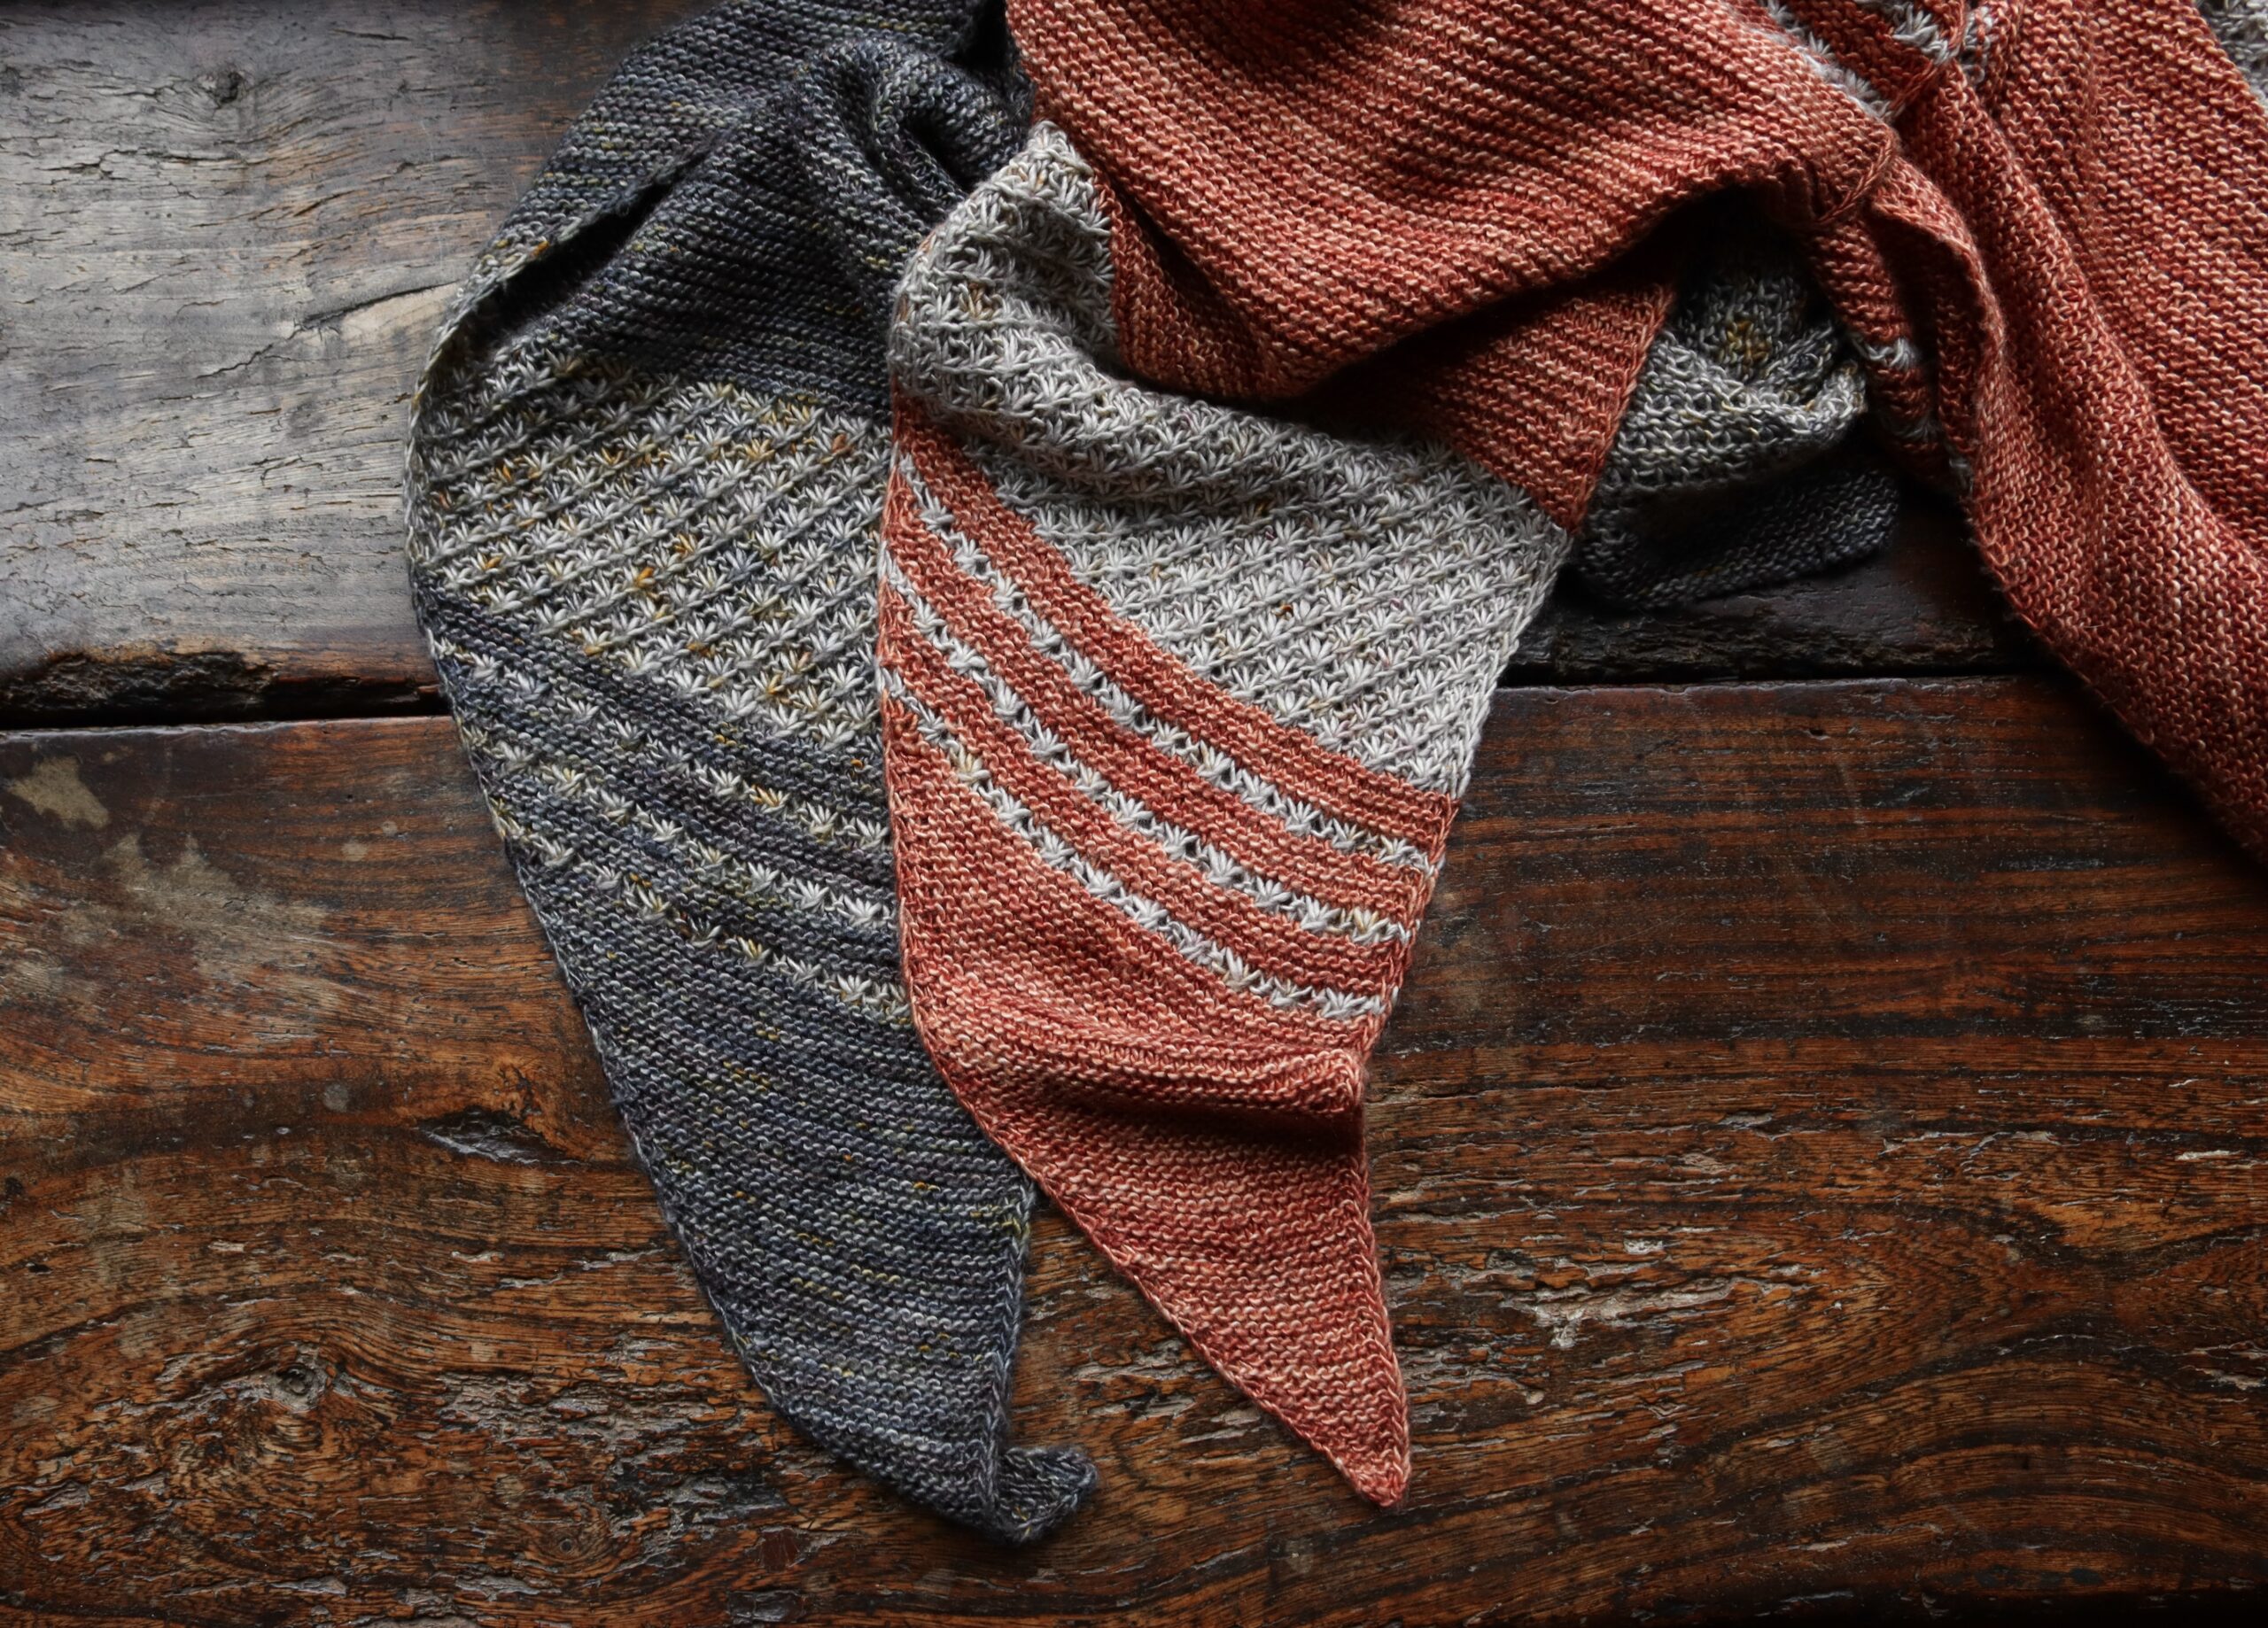 Two knitted shawls on a dark wood background, one in grey and the other terracotta